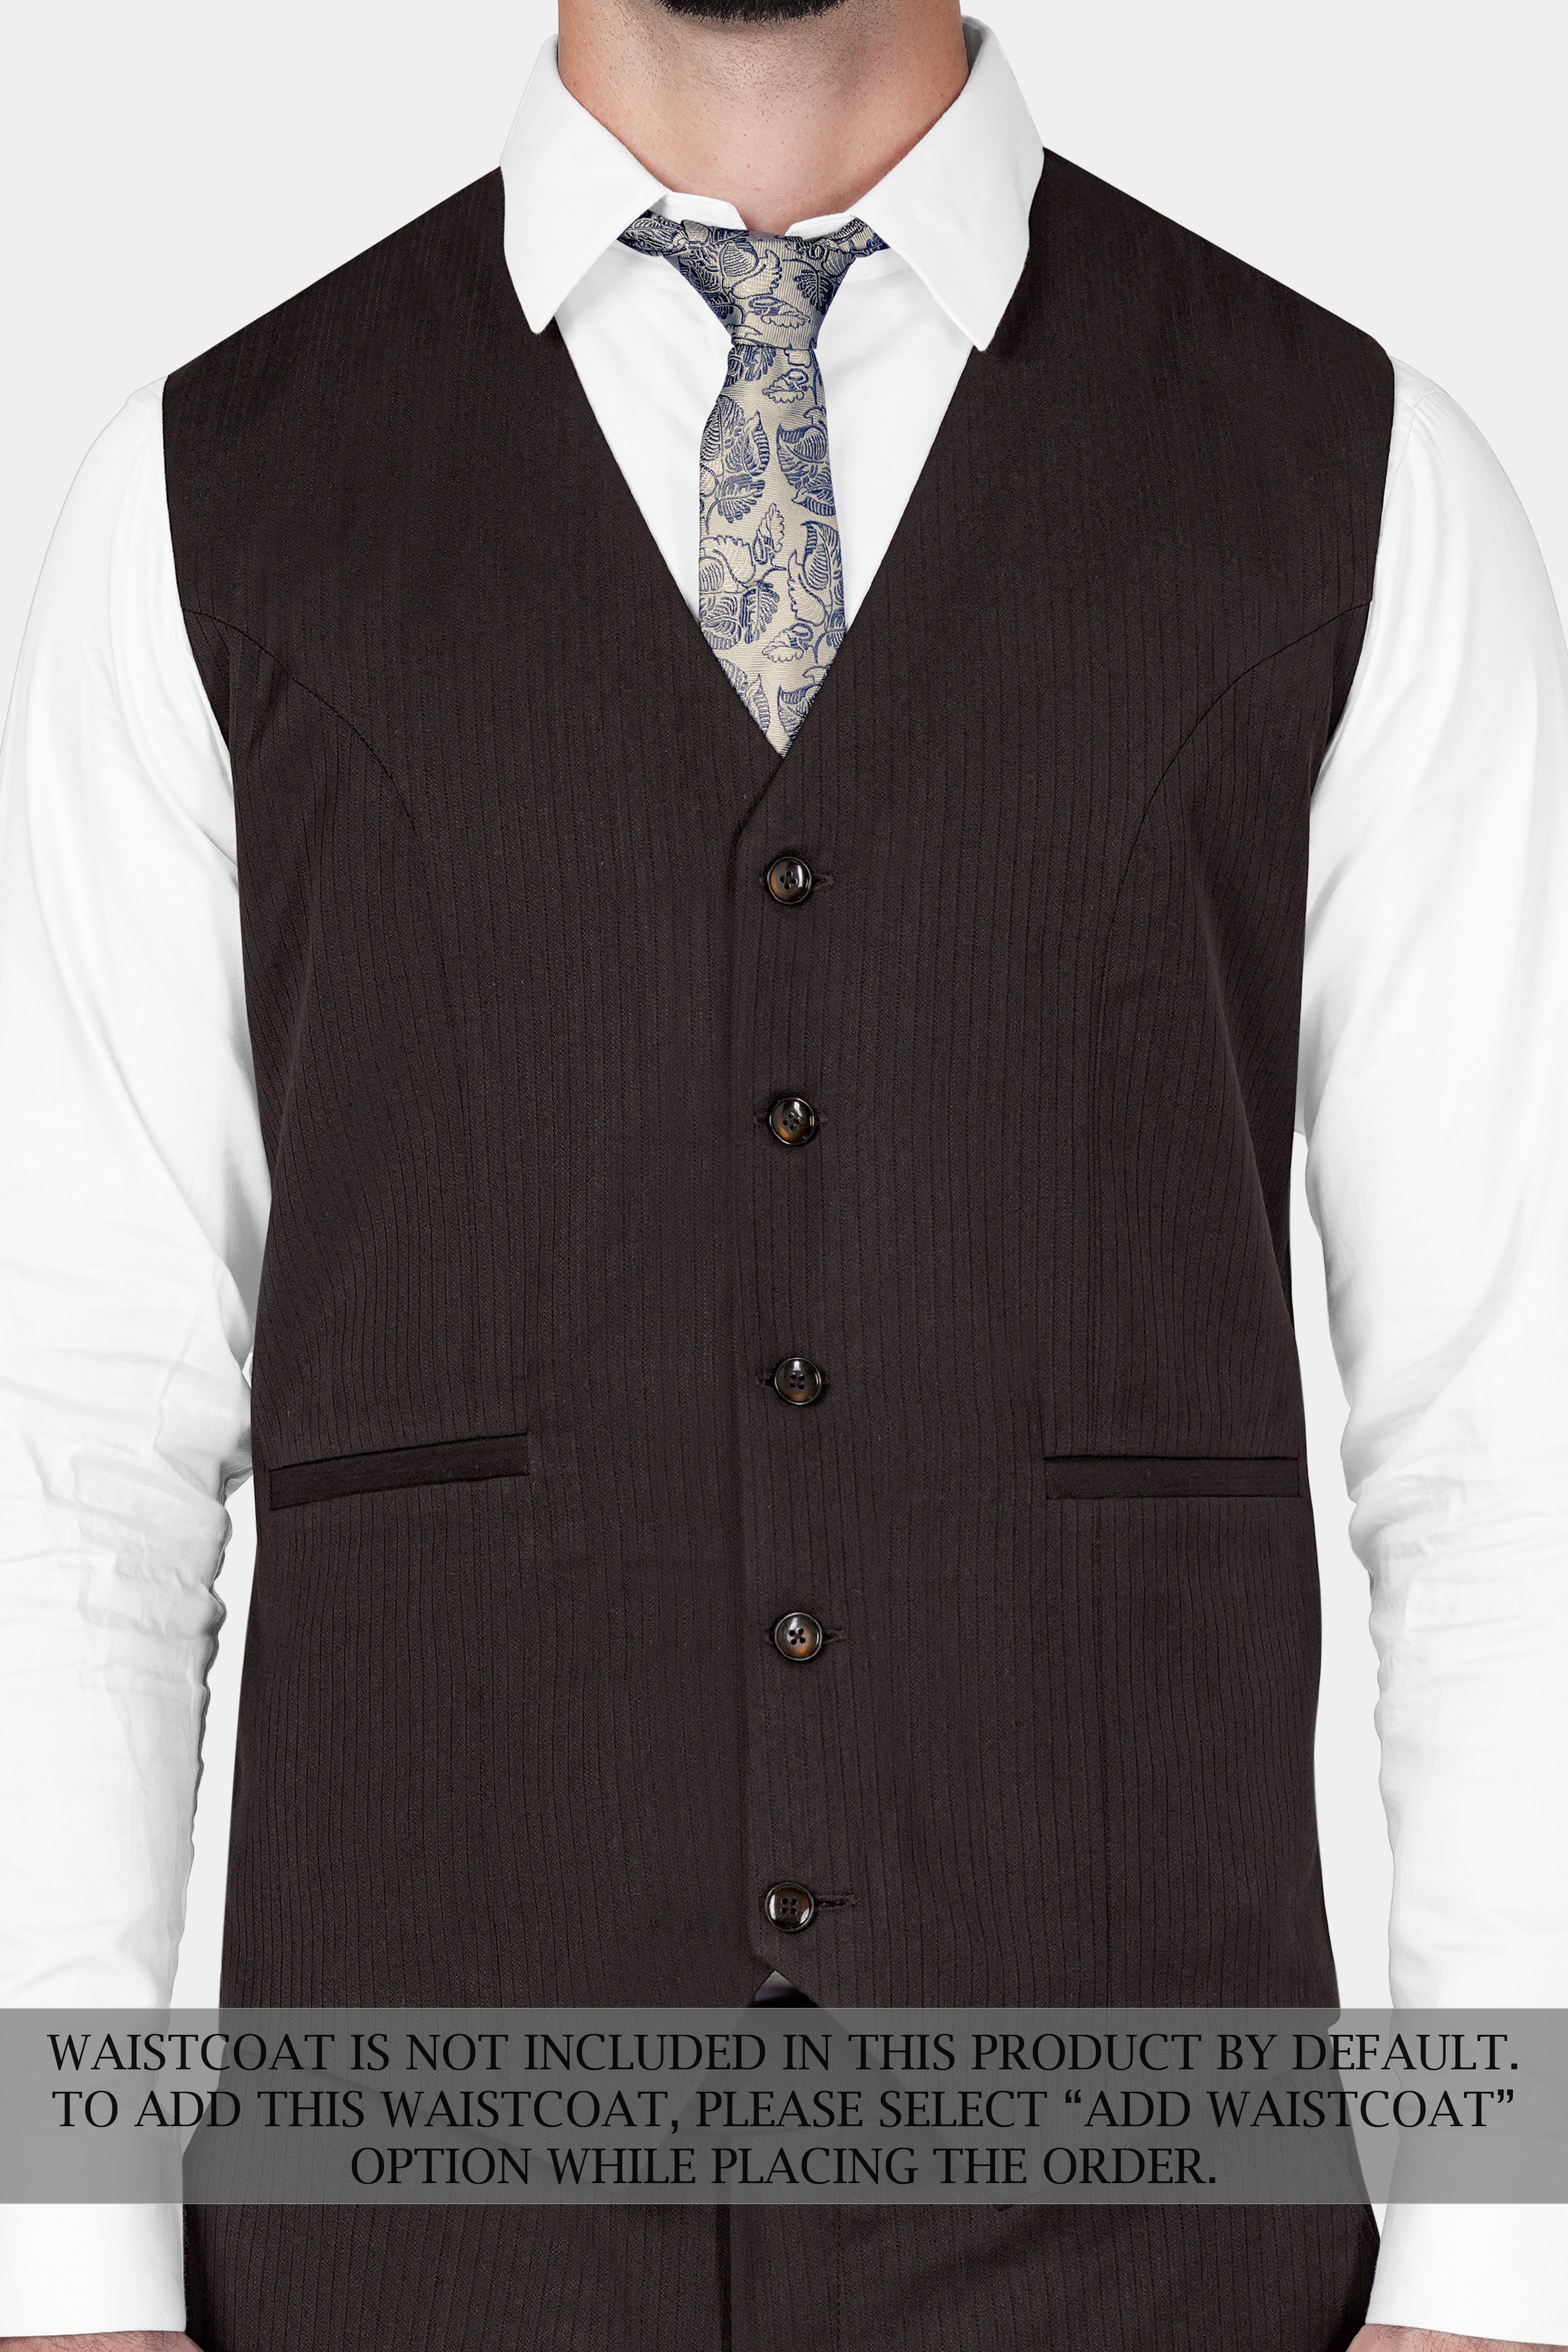 Iridium Gray Hand Stitched Lapels Wool Rich Double Breasted Designer Suit ST3131-DB-CT-36, ST3131-DB-CT-38, ST3131-DB-CT-40, ST3131-DB-CT-42, ST3131-DB-CT-44, ST3131-DB-CT-46, ST3131-DB-CT-48, ST3131-DB-CT-50, ST3131-DB-CT-52, ST3131-DB-CT-54, ST3131-DB-CT-56, ST3131-DB-CT-58, ST3131-DB-CT-60